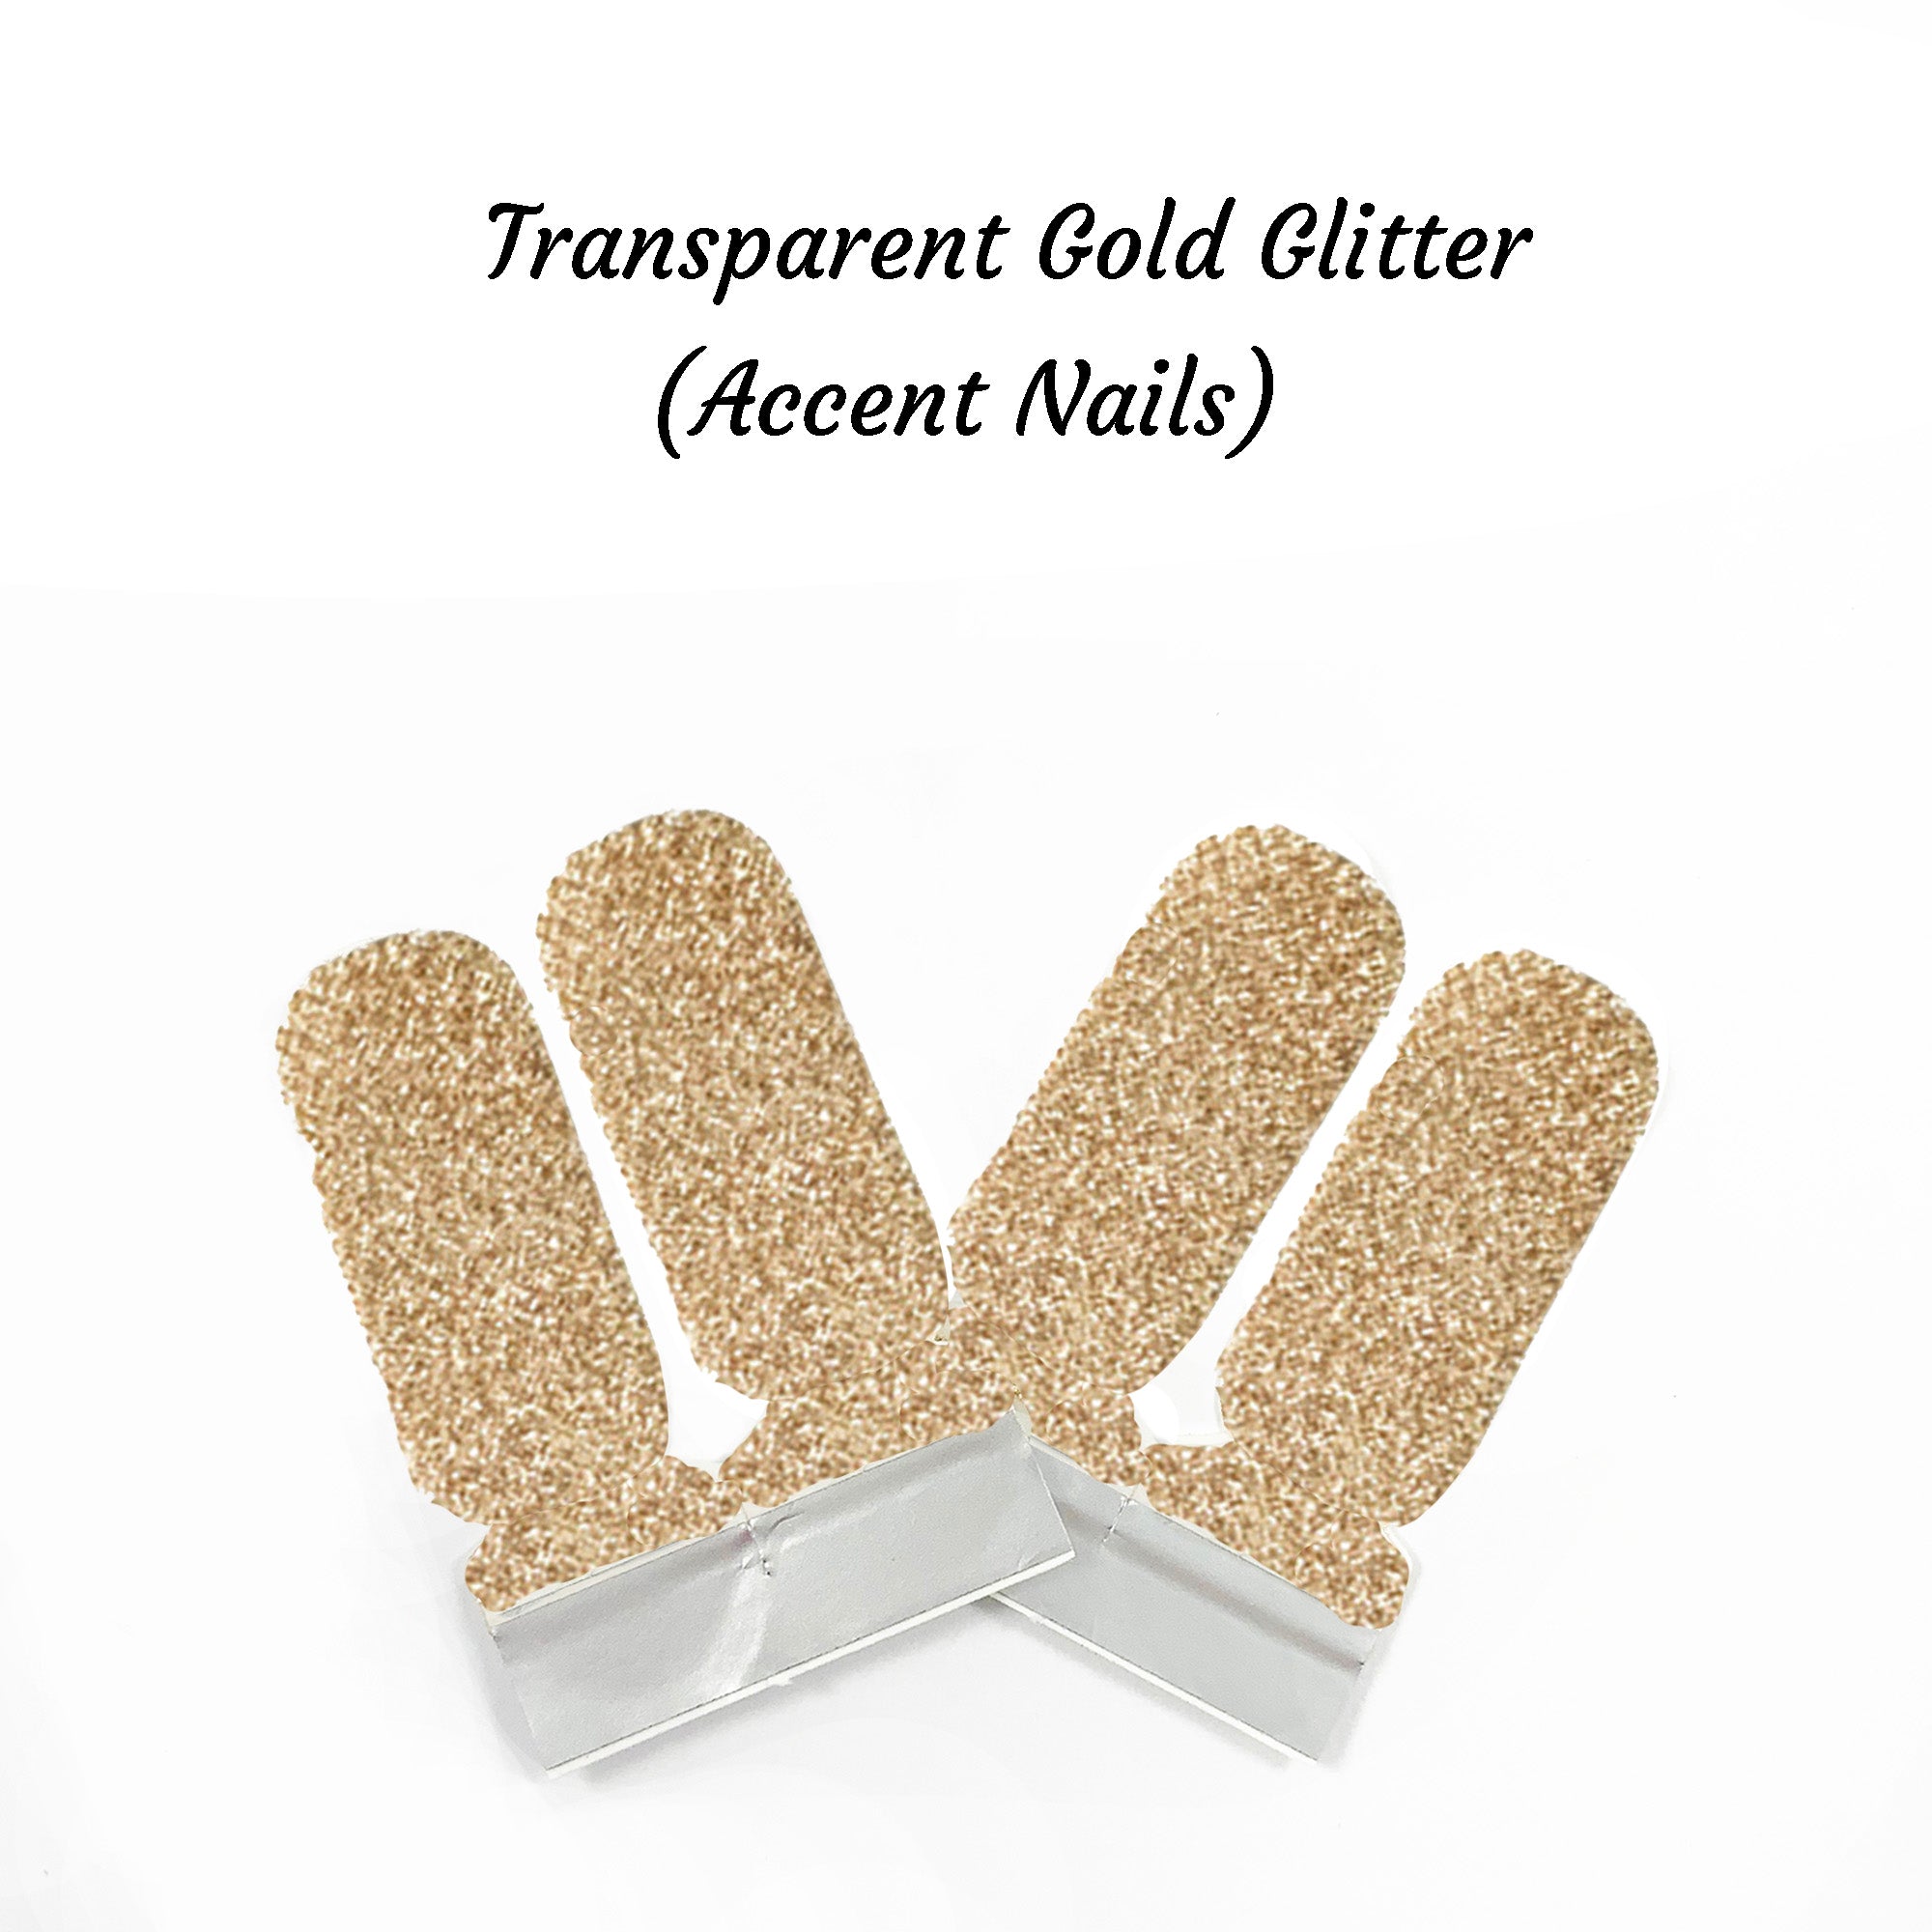 Gold Glitter Accent Nail wraps